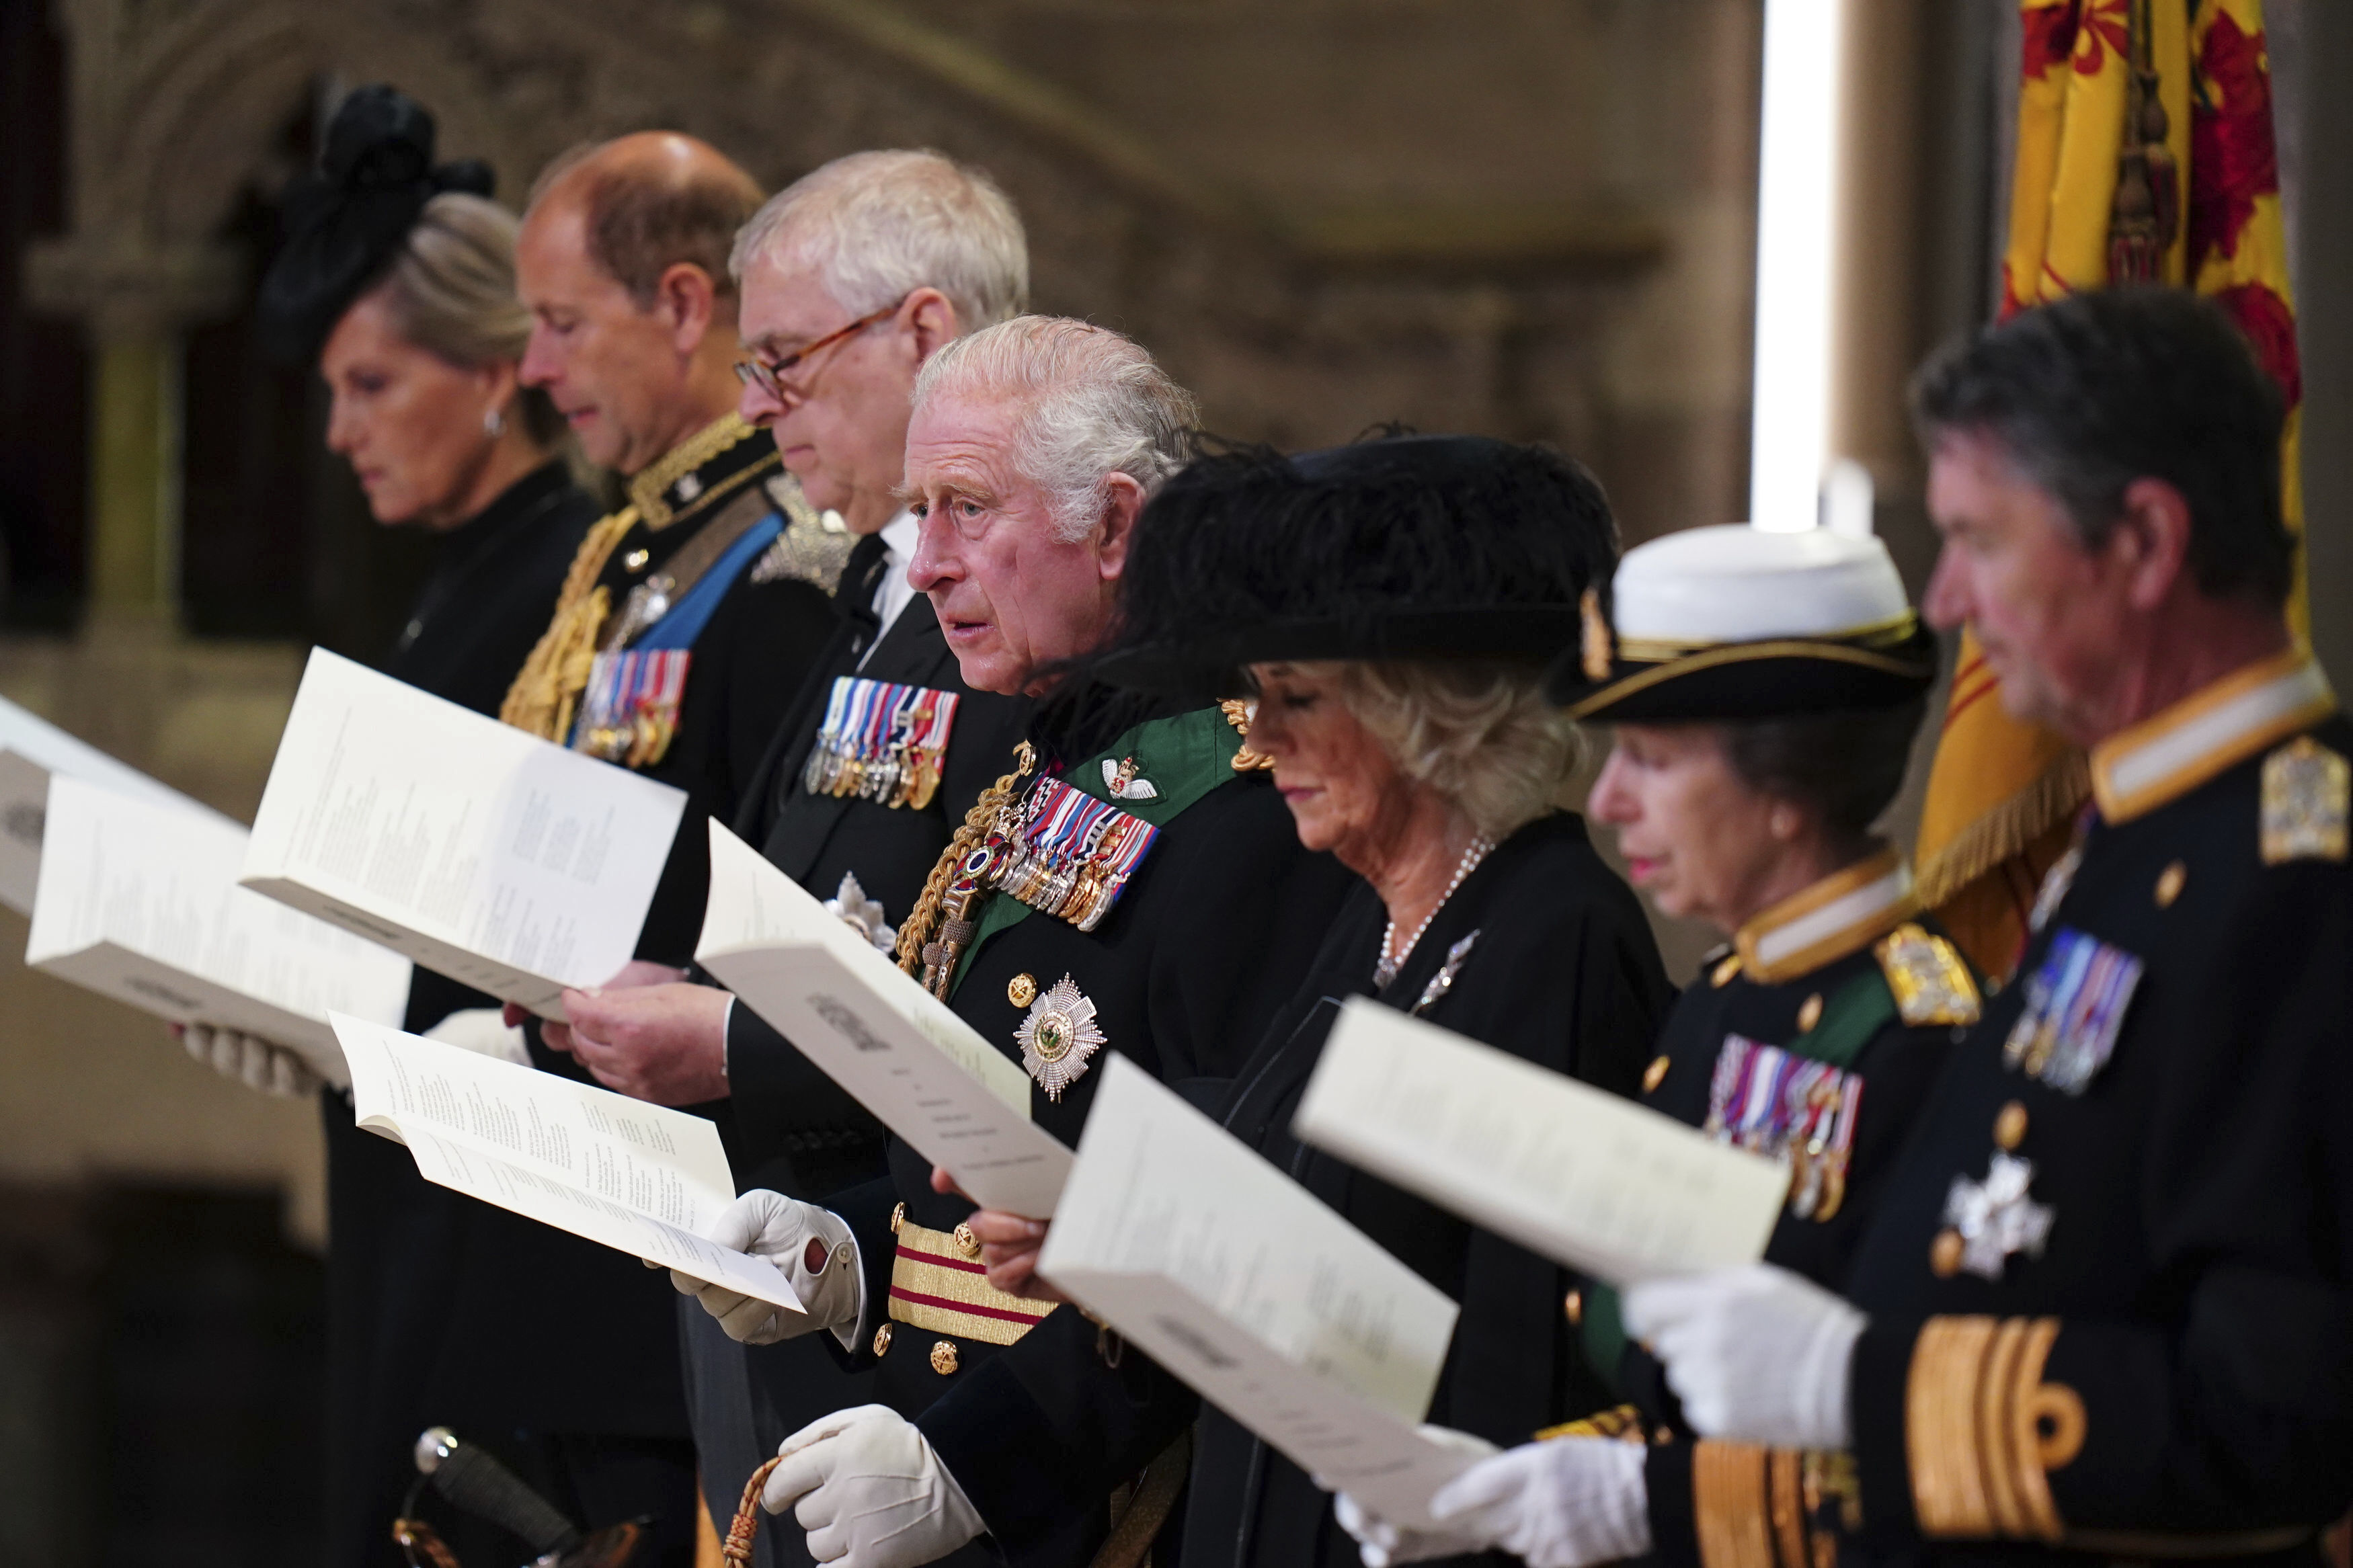 <p>Senior royal family members -- Sophie, Countess of Wessex and husband Prince Edward, Prince Andrew, King Charles III and wife Camilla, Queen Consort, Princess Anne and husband Sir Tim Laurence -- attended a Service of Prayer and Reflection for the Life of Queen Elizabeth II at St. Giles' Cathedral in Edinburgh, Scotland, on Sept. 12, 2022, four days after <a href="https://www.wonderwall.com/celebrity/celebrities-dignitaries-react-to-death-of-queen-elizabeth-ii-647756.gallery">the monarch's death</a> before her coffin headed to London for her funeral.</p>